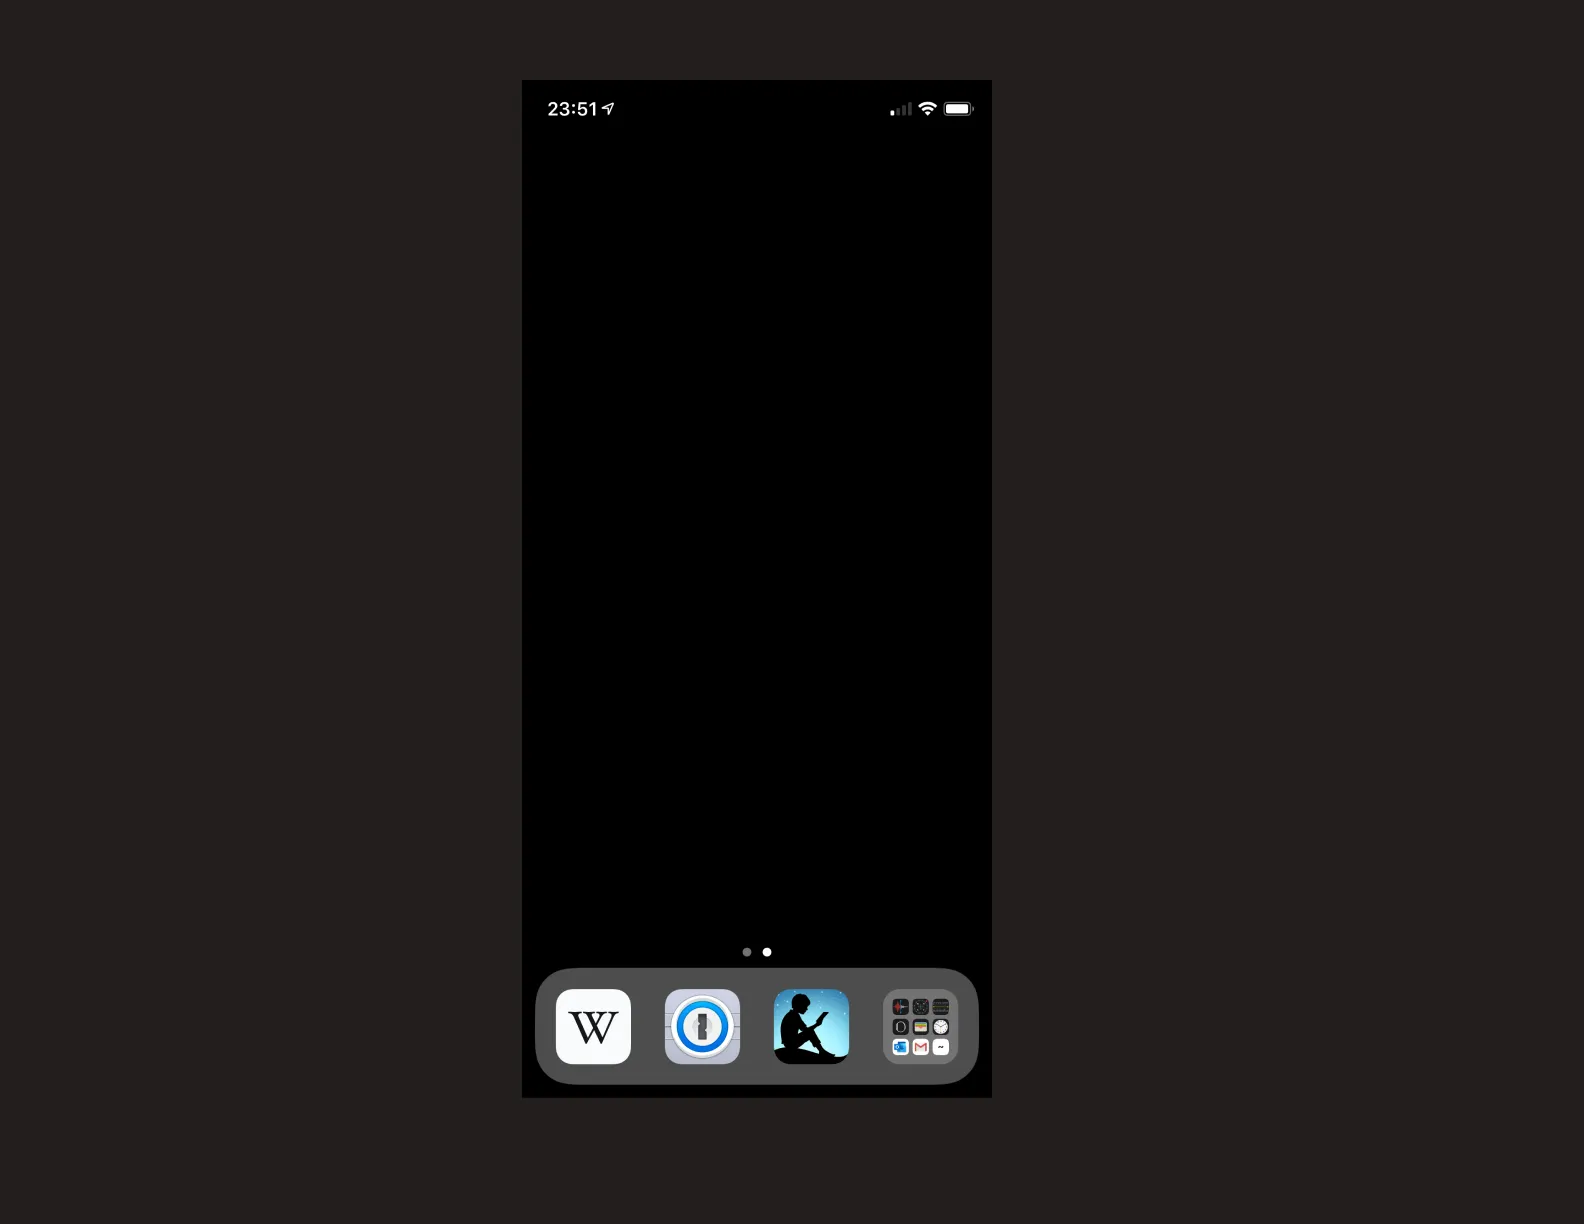 A screenshot of my iPhone's current main screen setup. It is blank besides the bottom four app shelf items: Wikipedia, 1Password, Kindle, and a folder of all other apps. The background of the main screen is pure black.